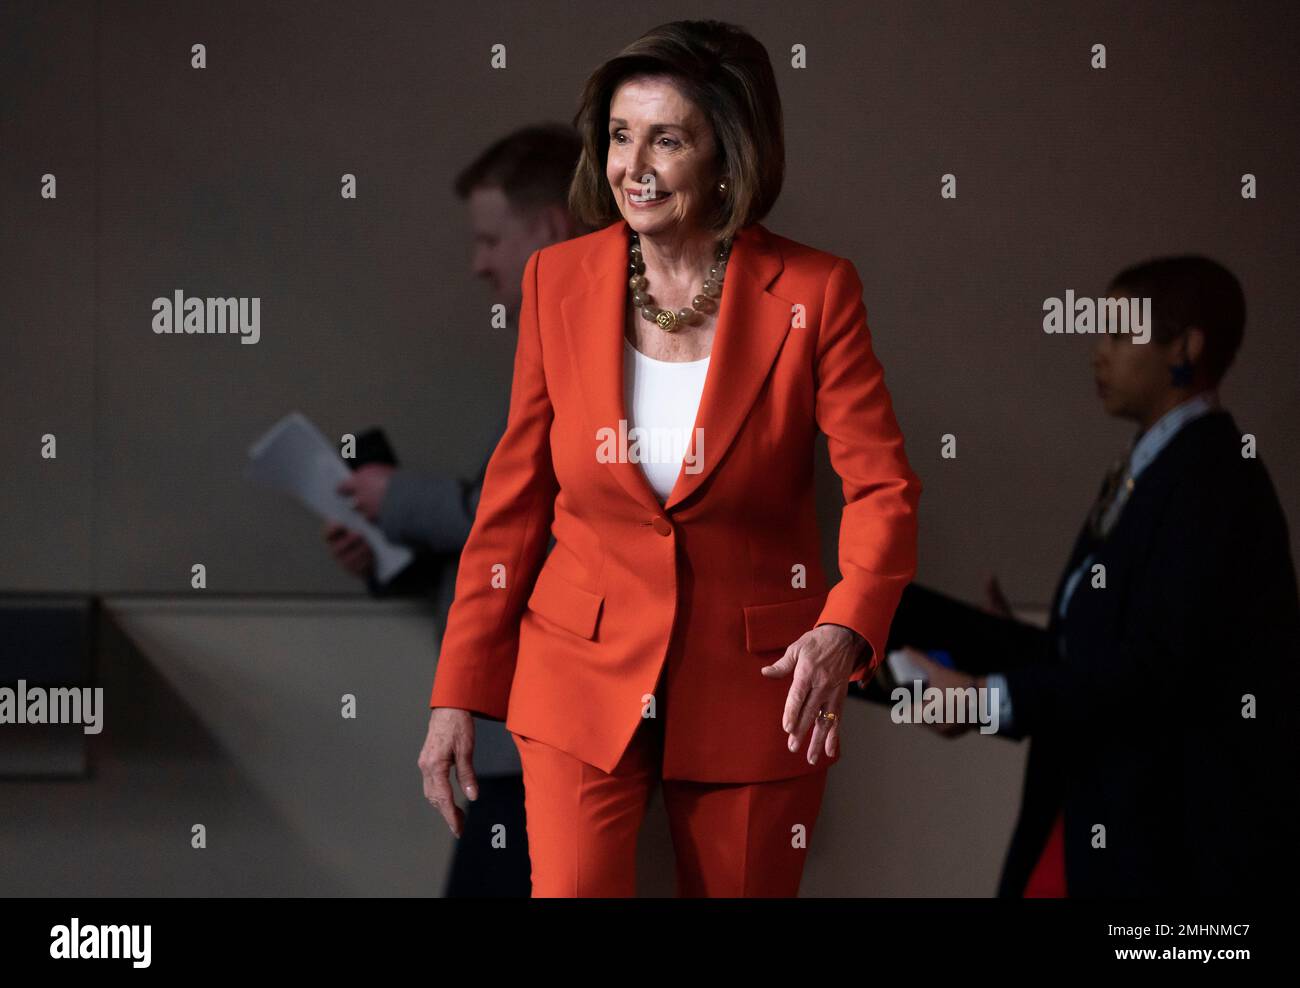 Speaker of the House Nancy Pelosi, D-Calif., arrives to talk to reporters just before the House vote on a resolution to formalize the impeachment investigation of President Donald Trump, in Washington, Thursday, Oct. 31, 2019. (AP Photo/J. Scott Applewhite) Stock Photo